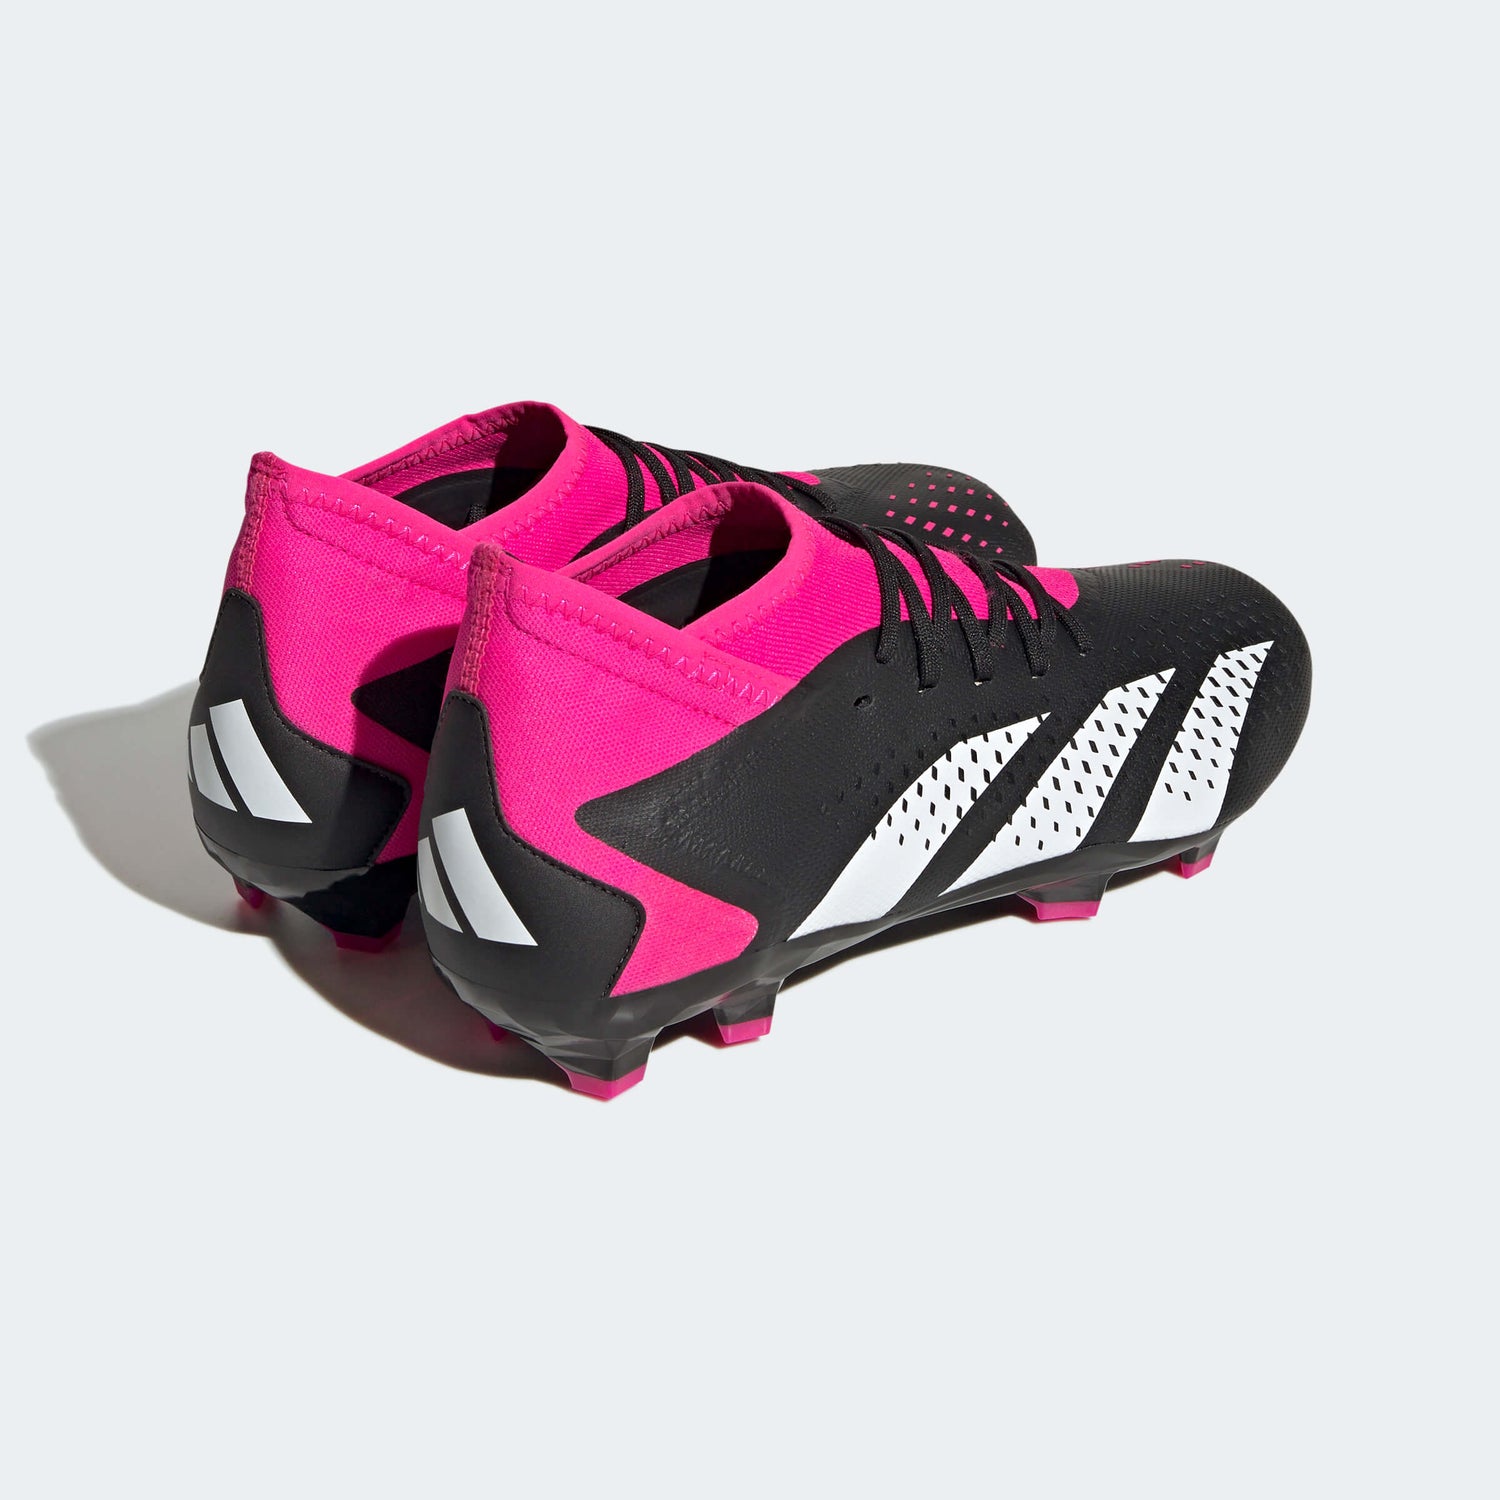 Adidas Predator Accuracy.3 FG - Own Your Football (SP23) (Pair - Back Lateral)